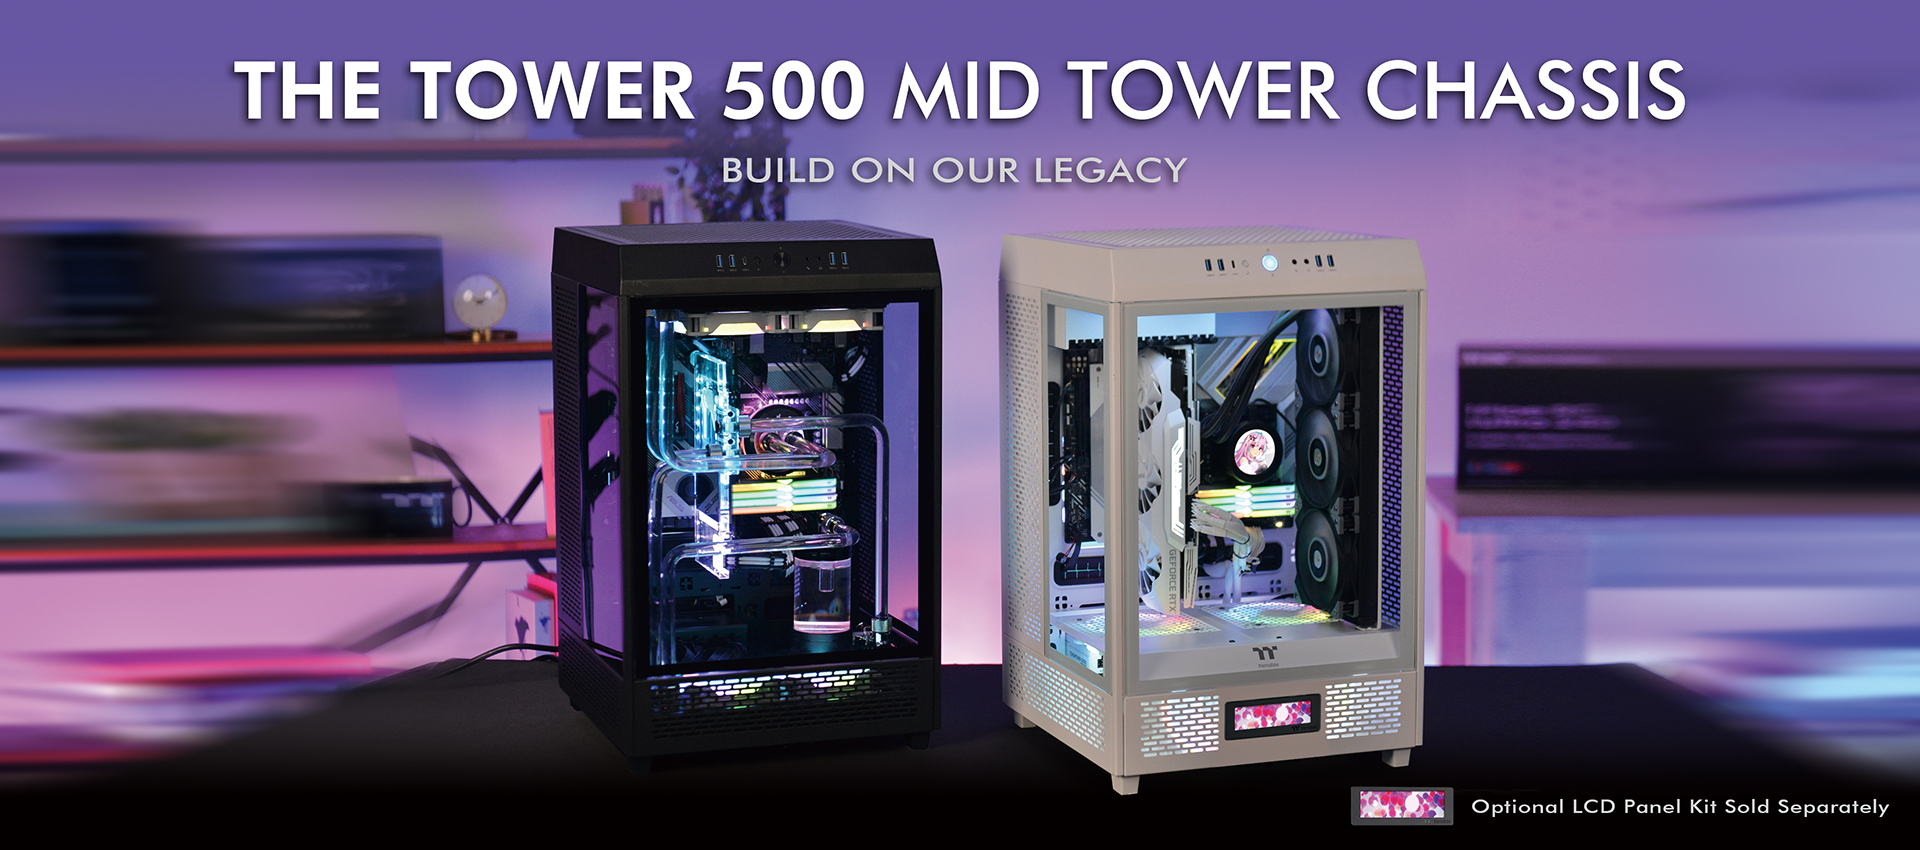 The Tower 500